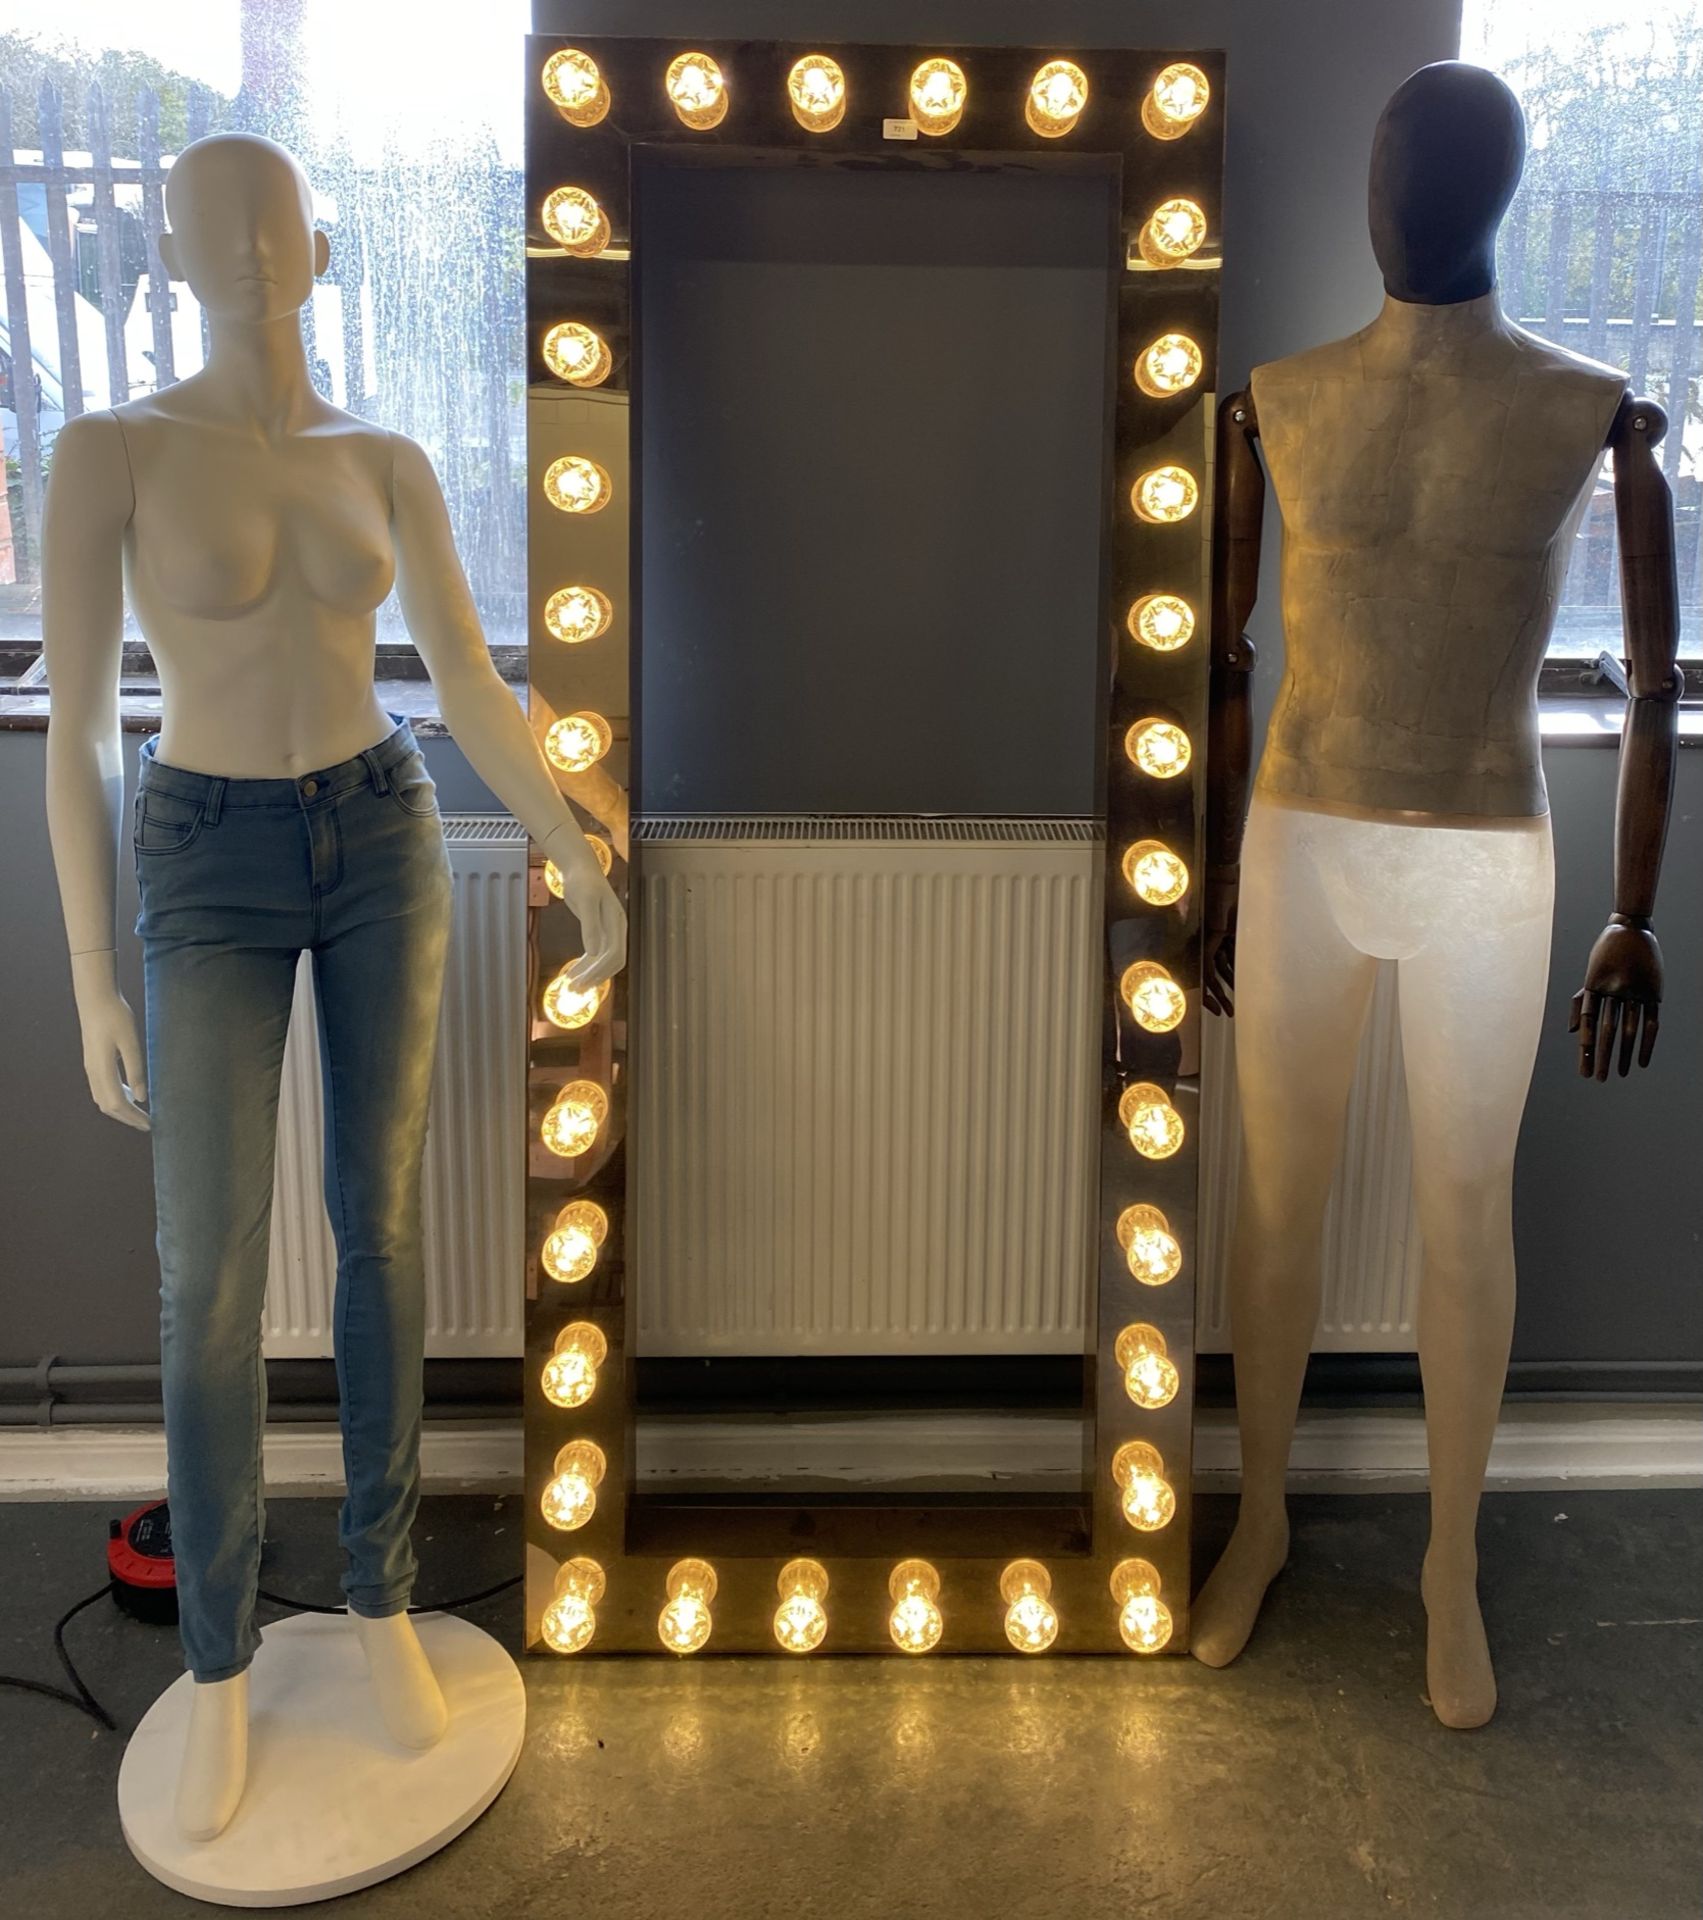 A fibreglass male mannequin with articul